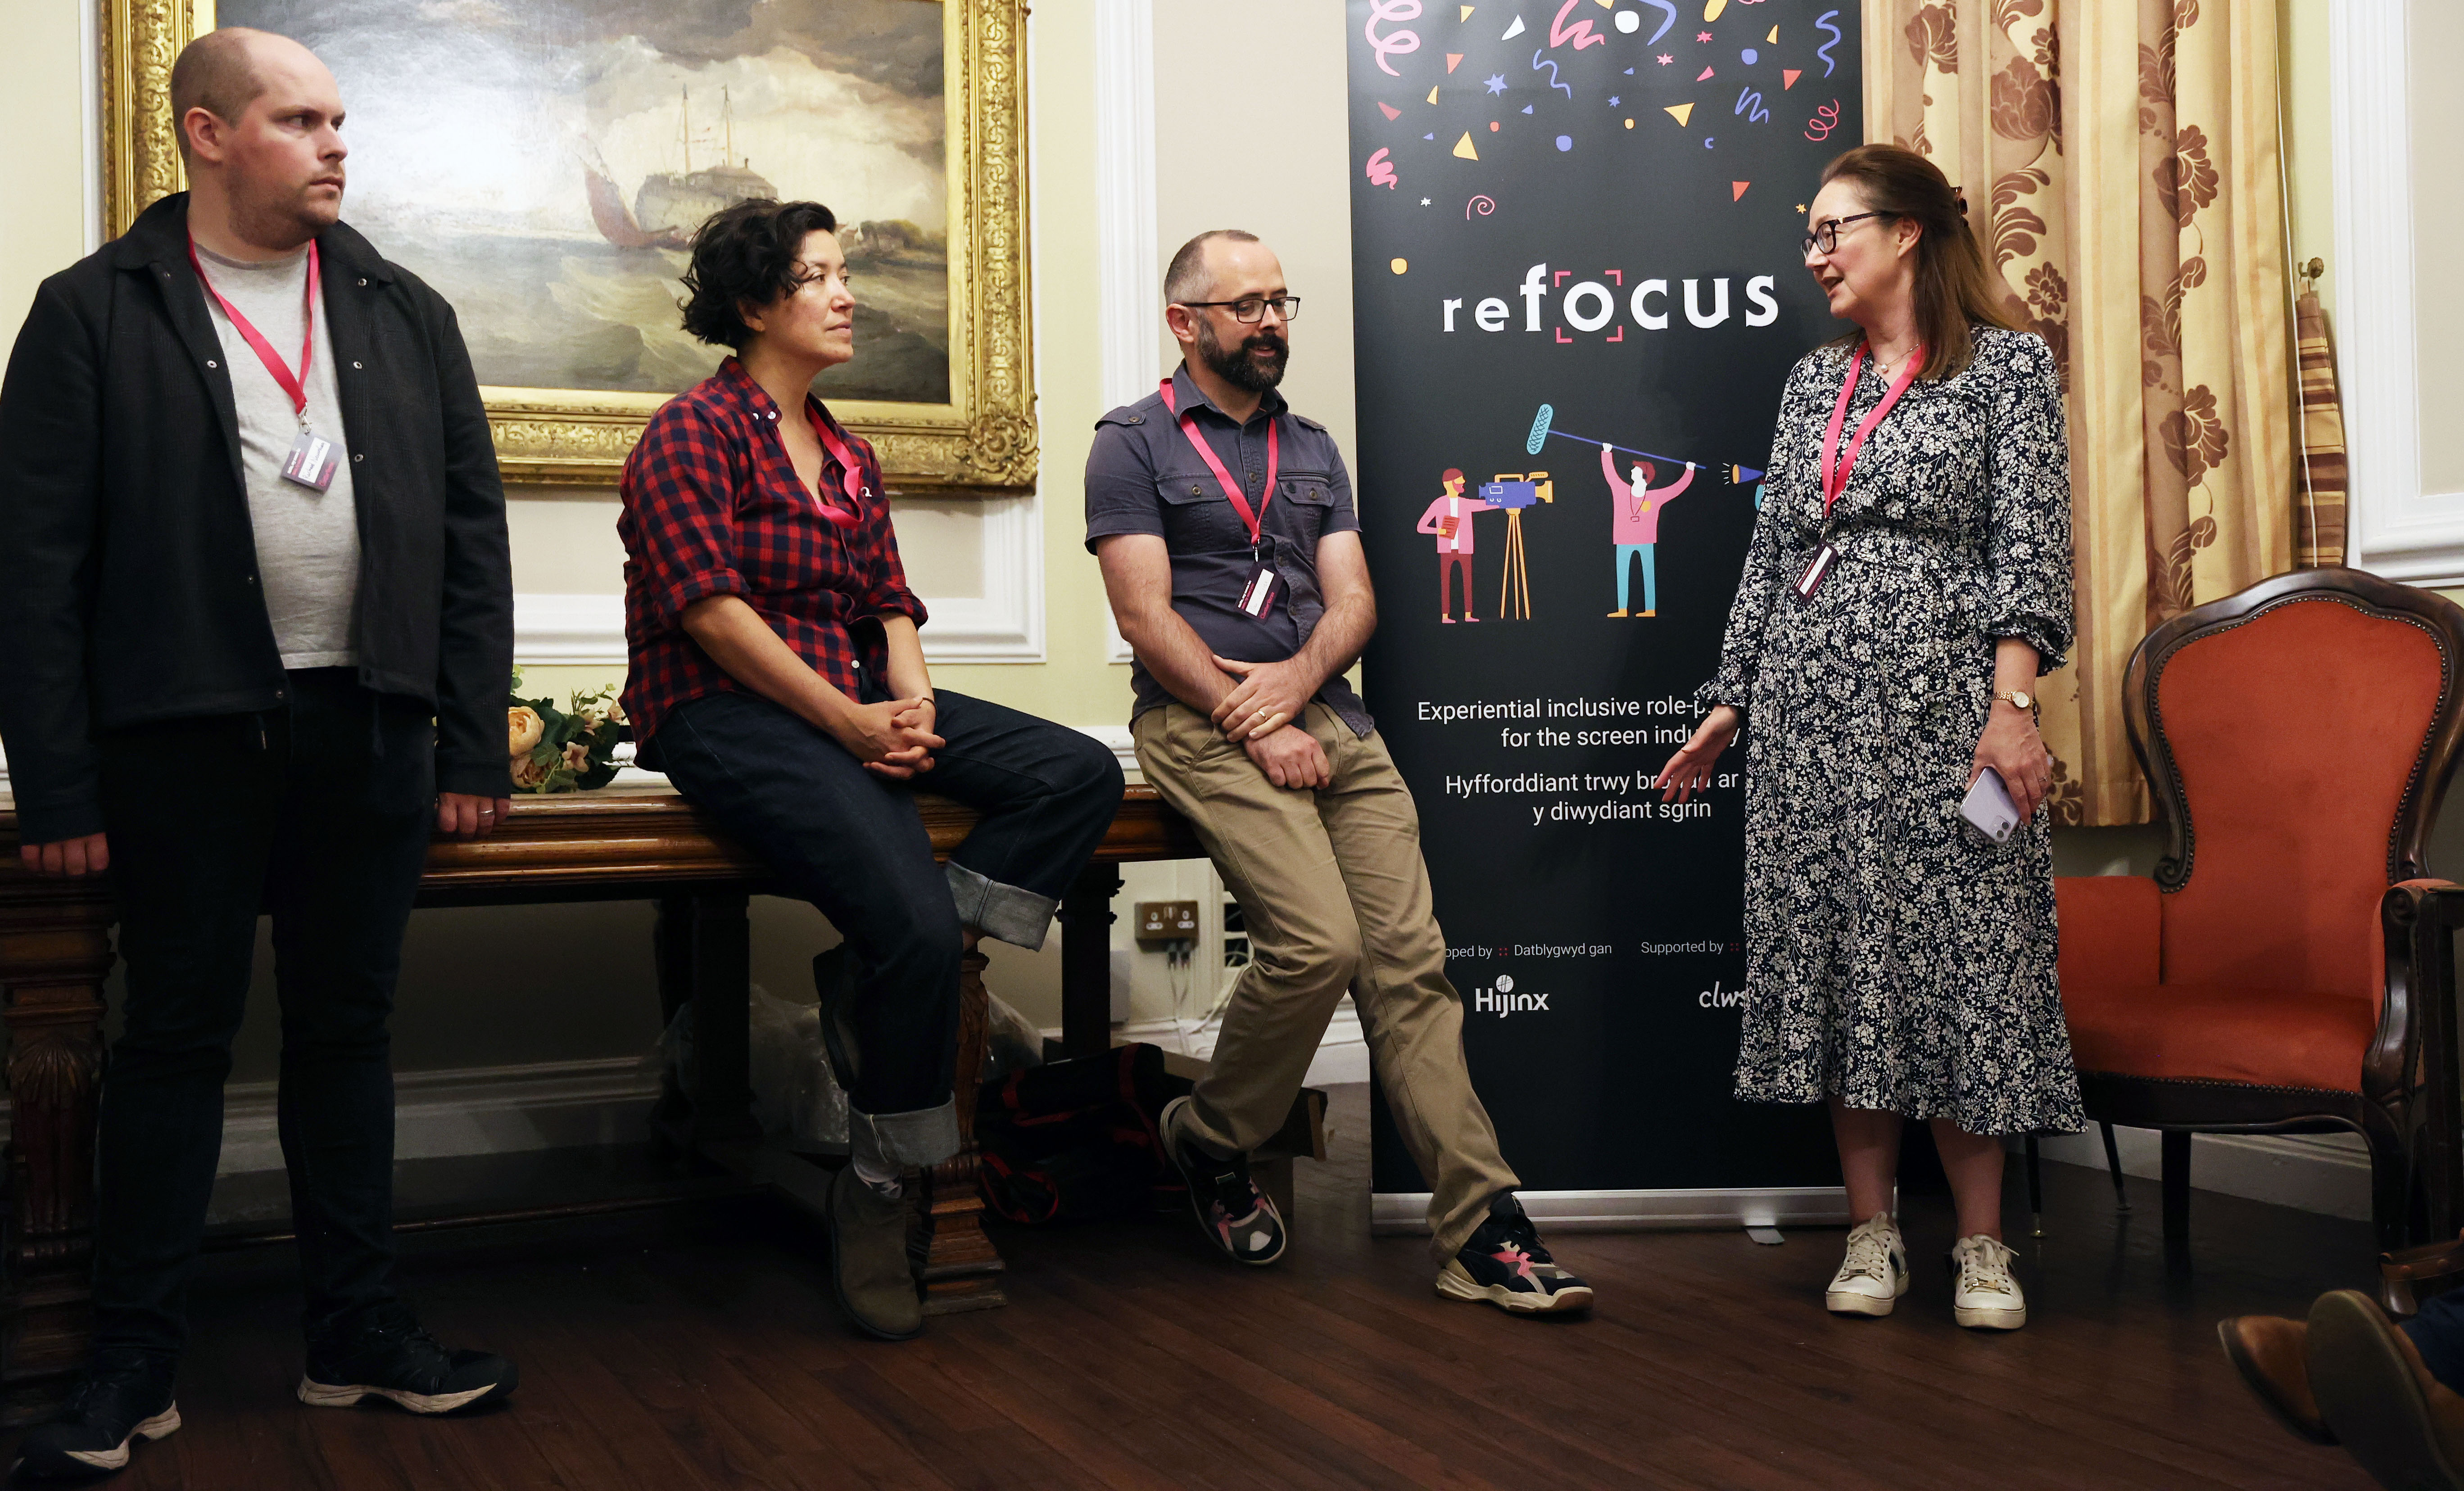 Professor Ruth McElroy introduces Hijinx actors and staff to demonstrate Refocus at ClwstwrVerse